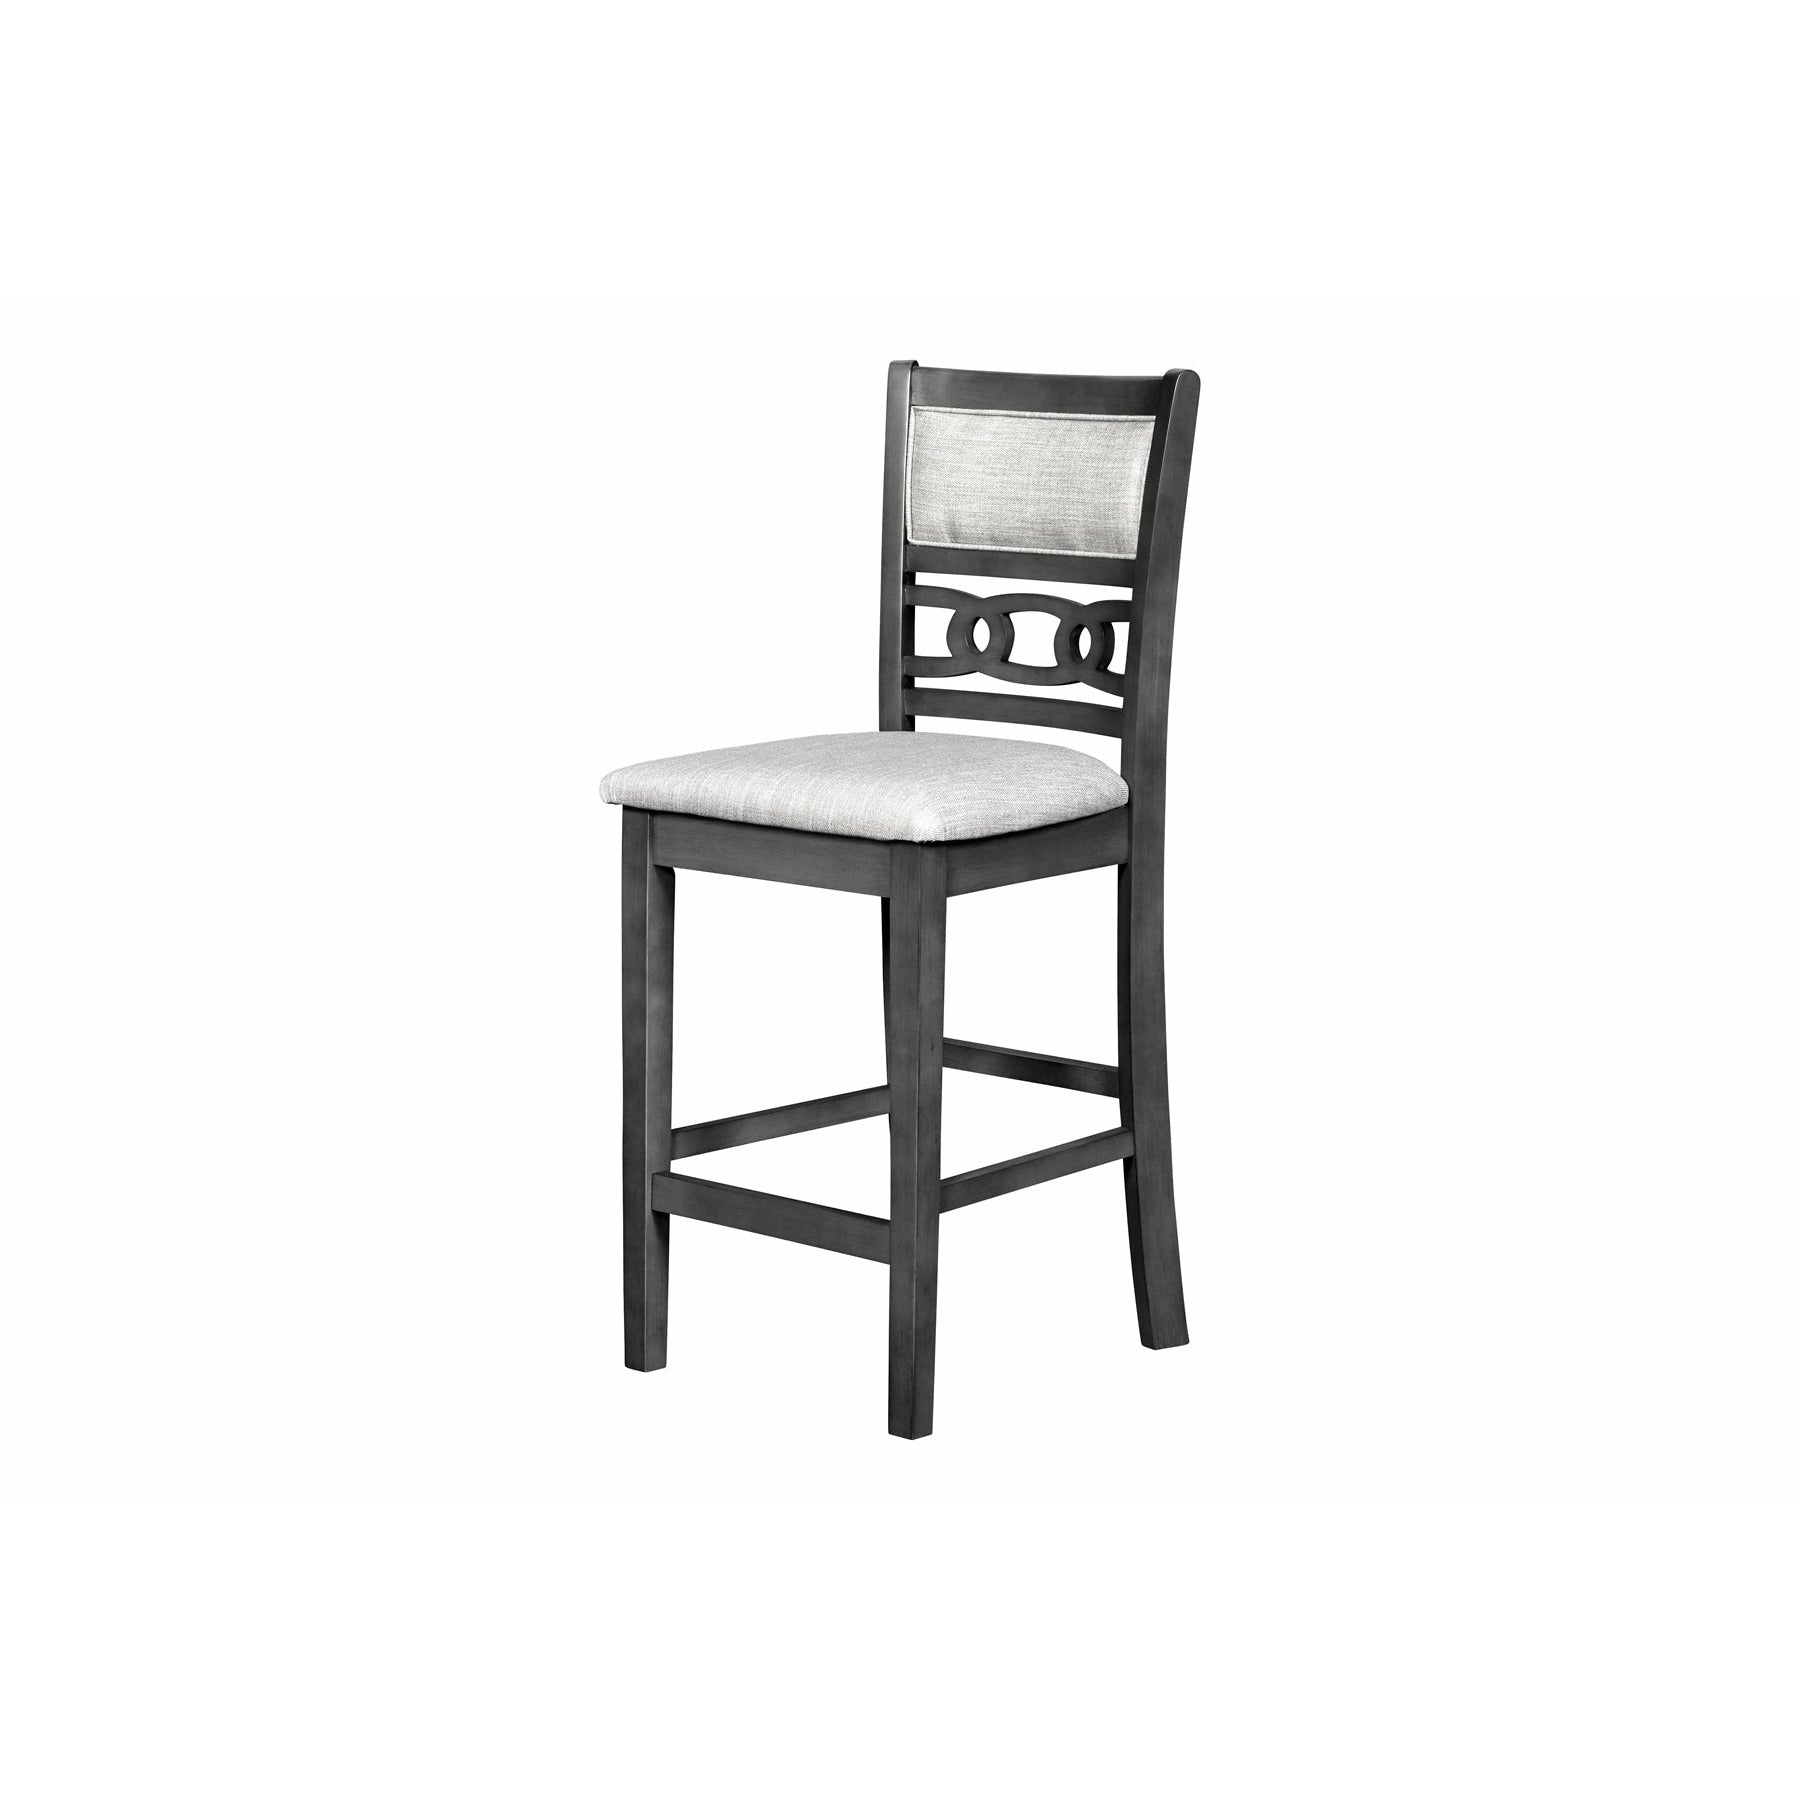 Gia Counter Height Chair - Grey